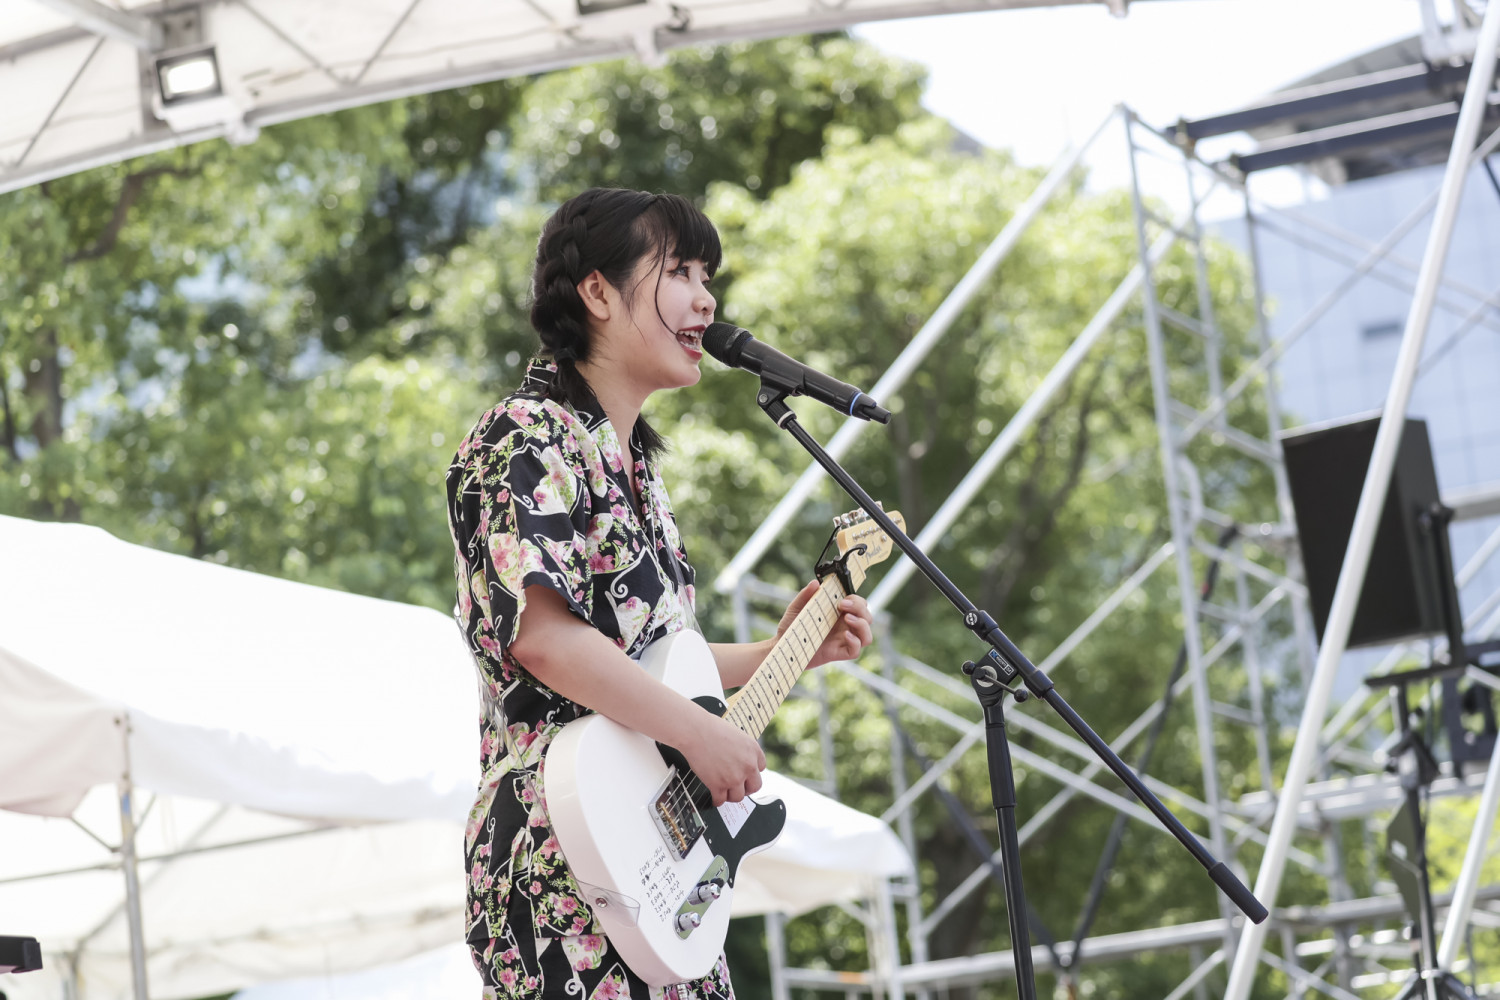 TIF 2019: Chiaki Mayumura’s Performance, which Fuels the Crowd’s Energy and Love of the Otaku